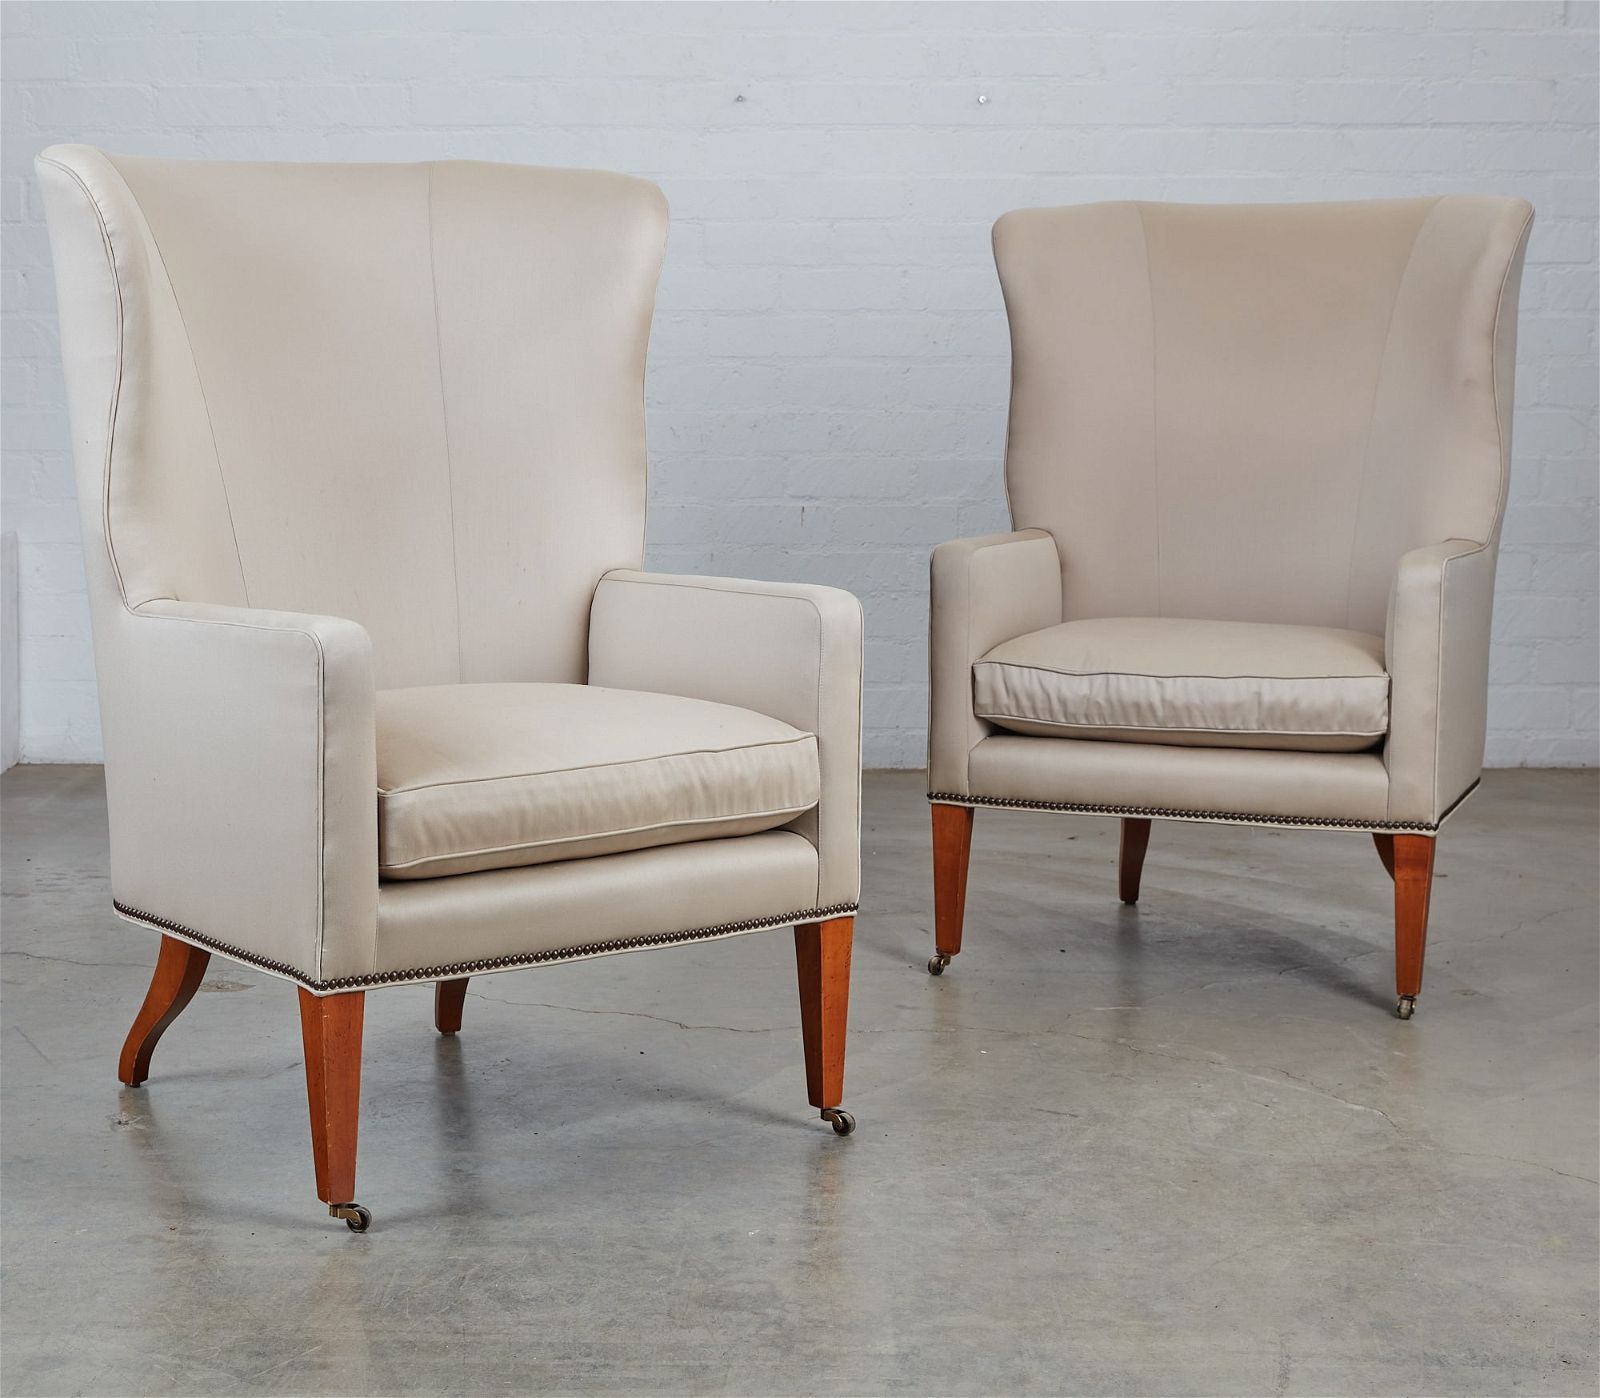 A PAIR OF BAKER CREME UPHOLSTERED